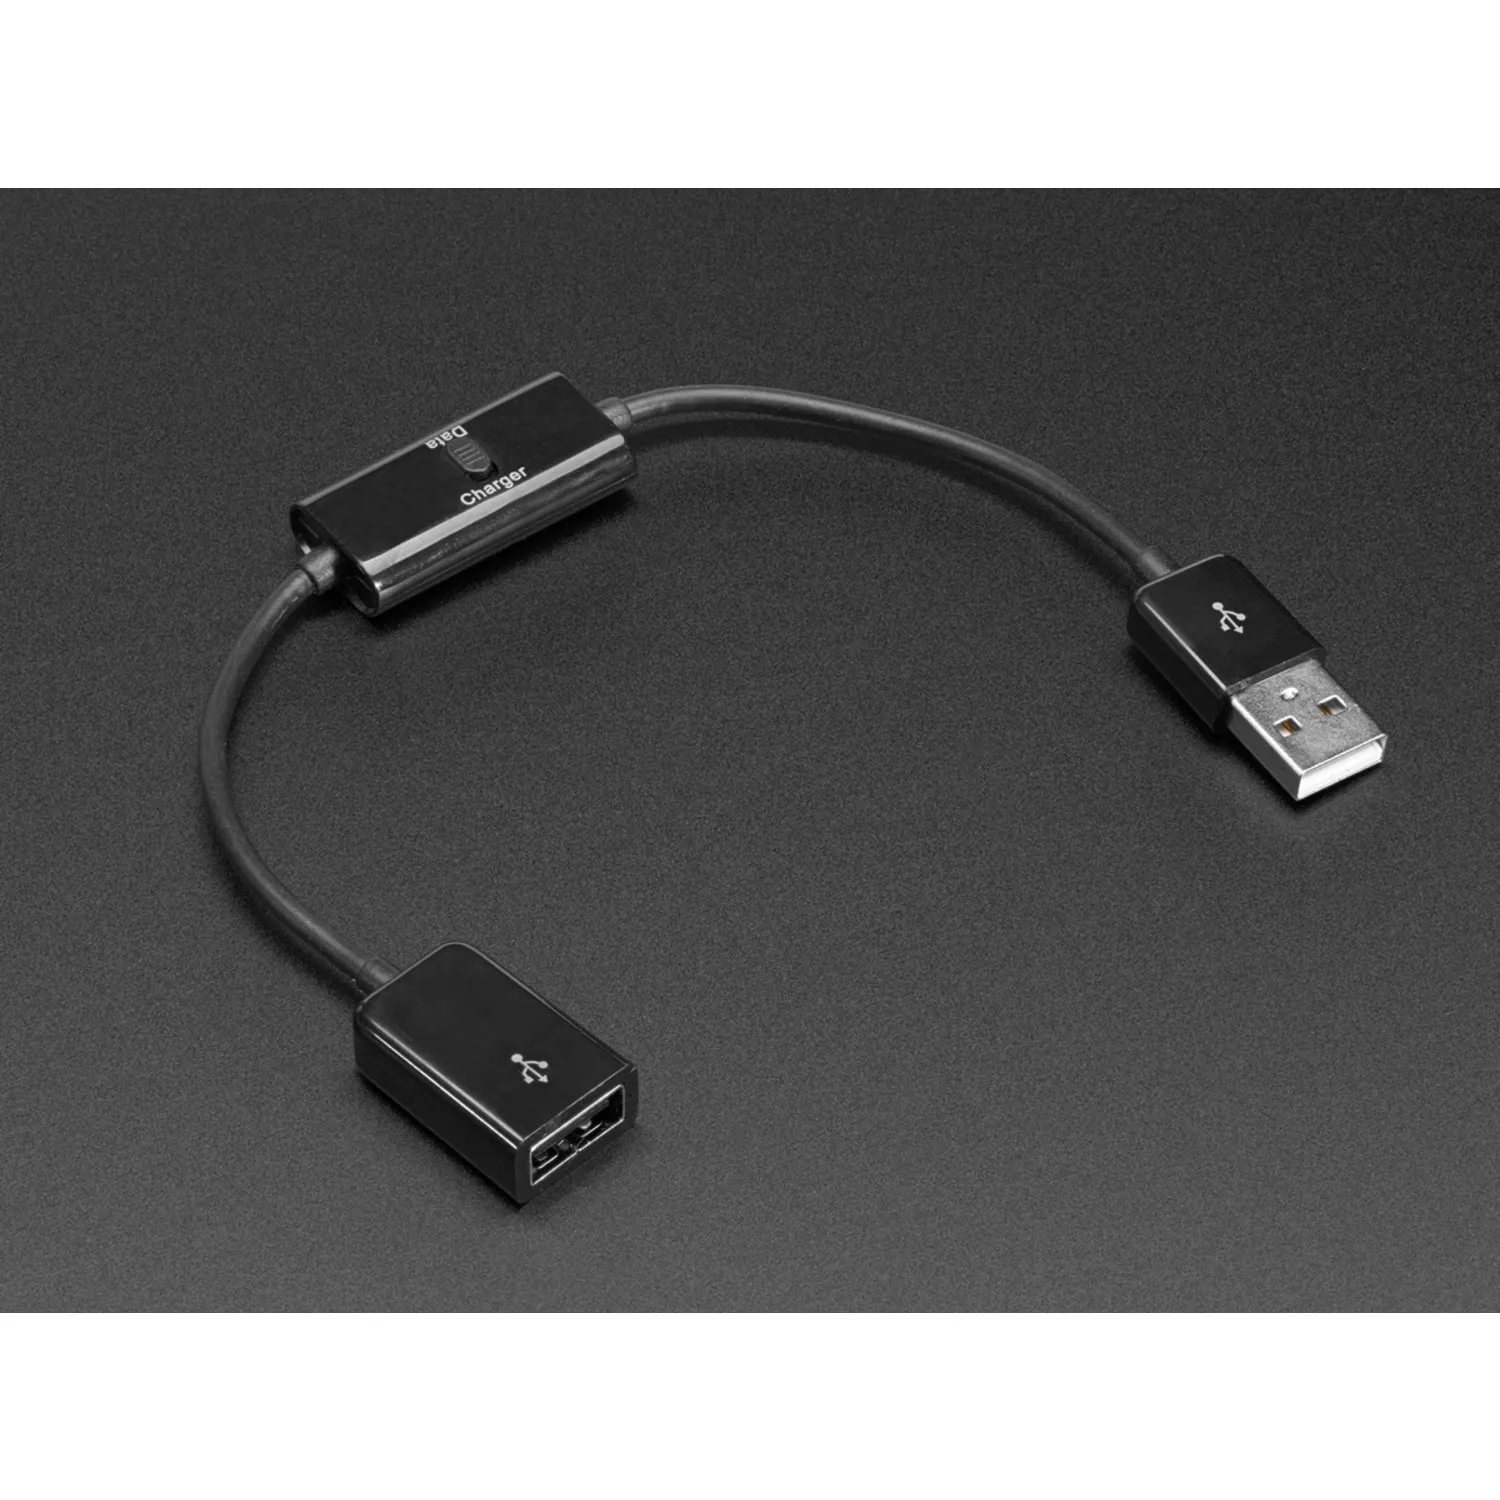 Photo of USB Extension Cable with Data/Charge Sync Switch